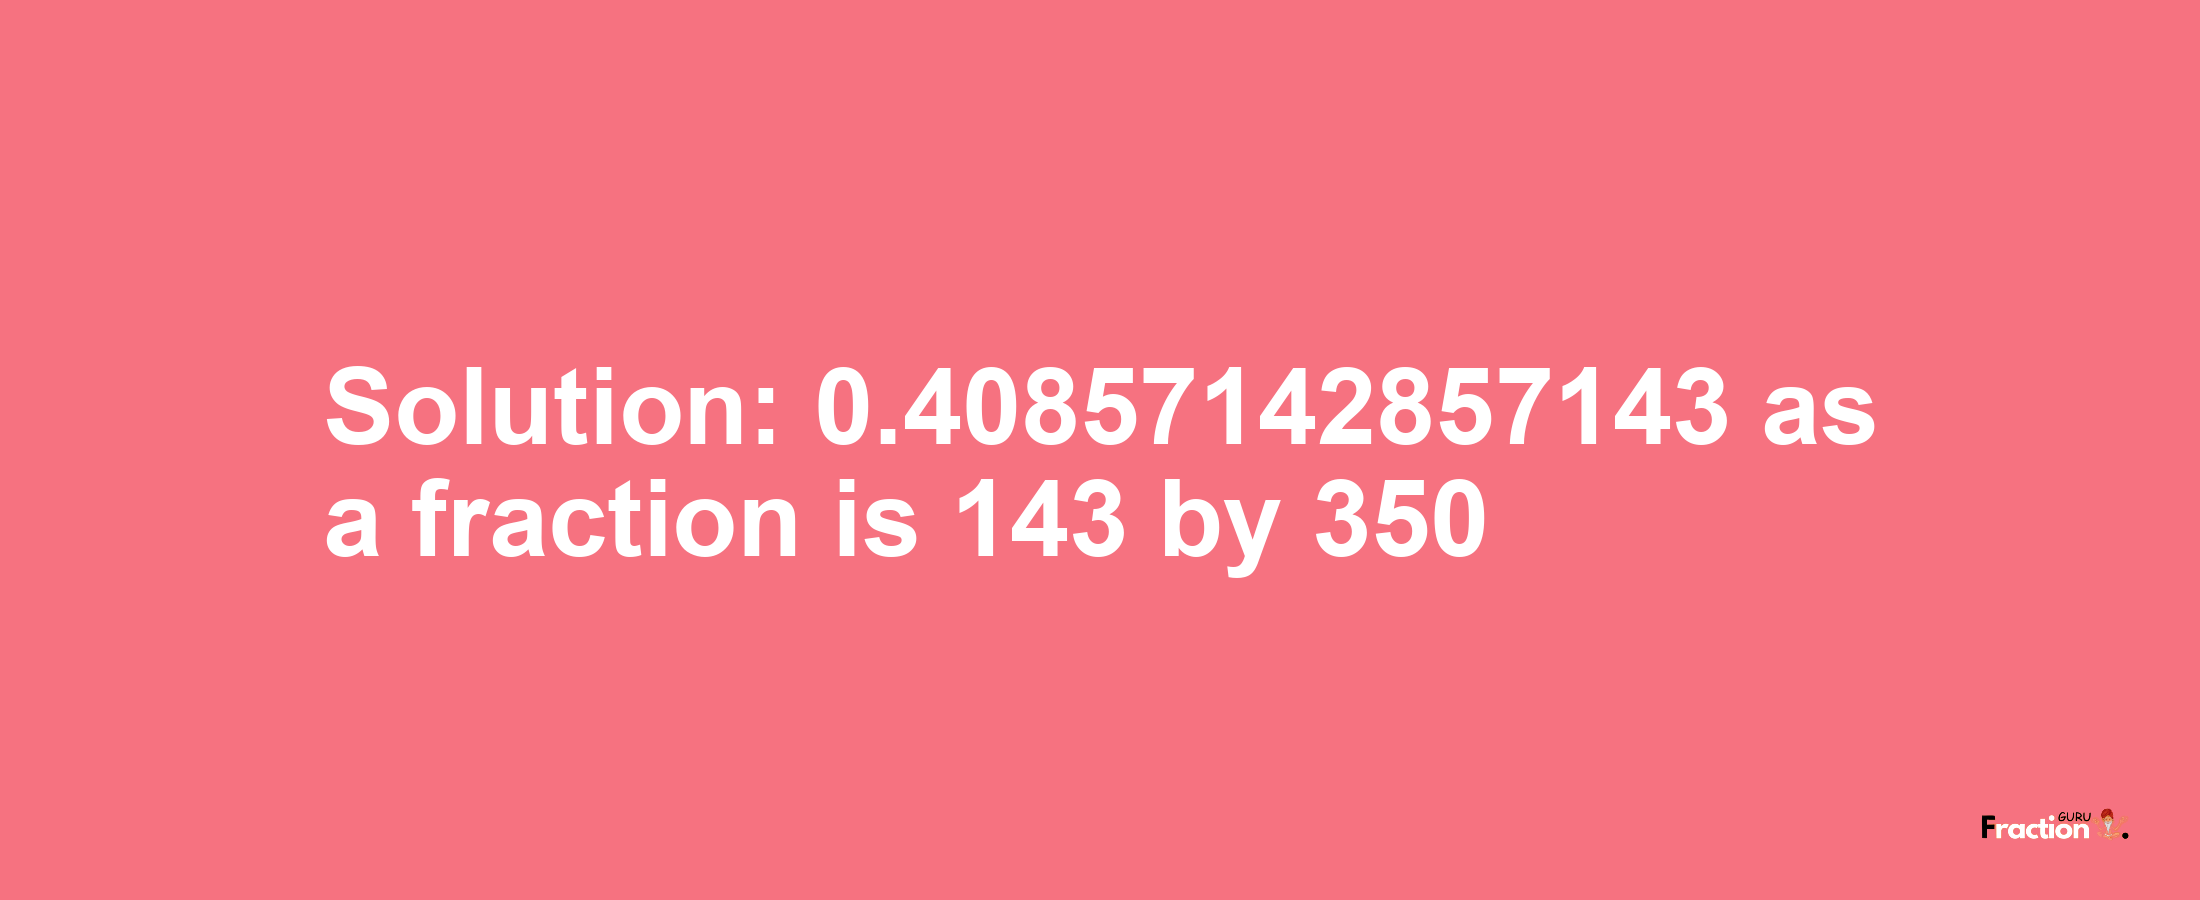 Solution:0.40857142857143 as a fraction is 143/350